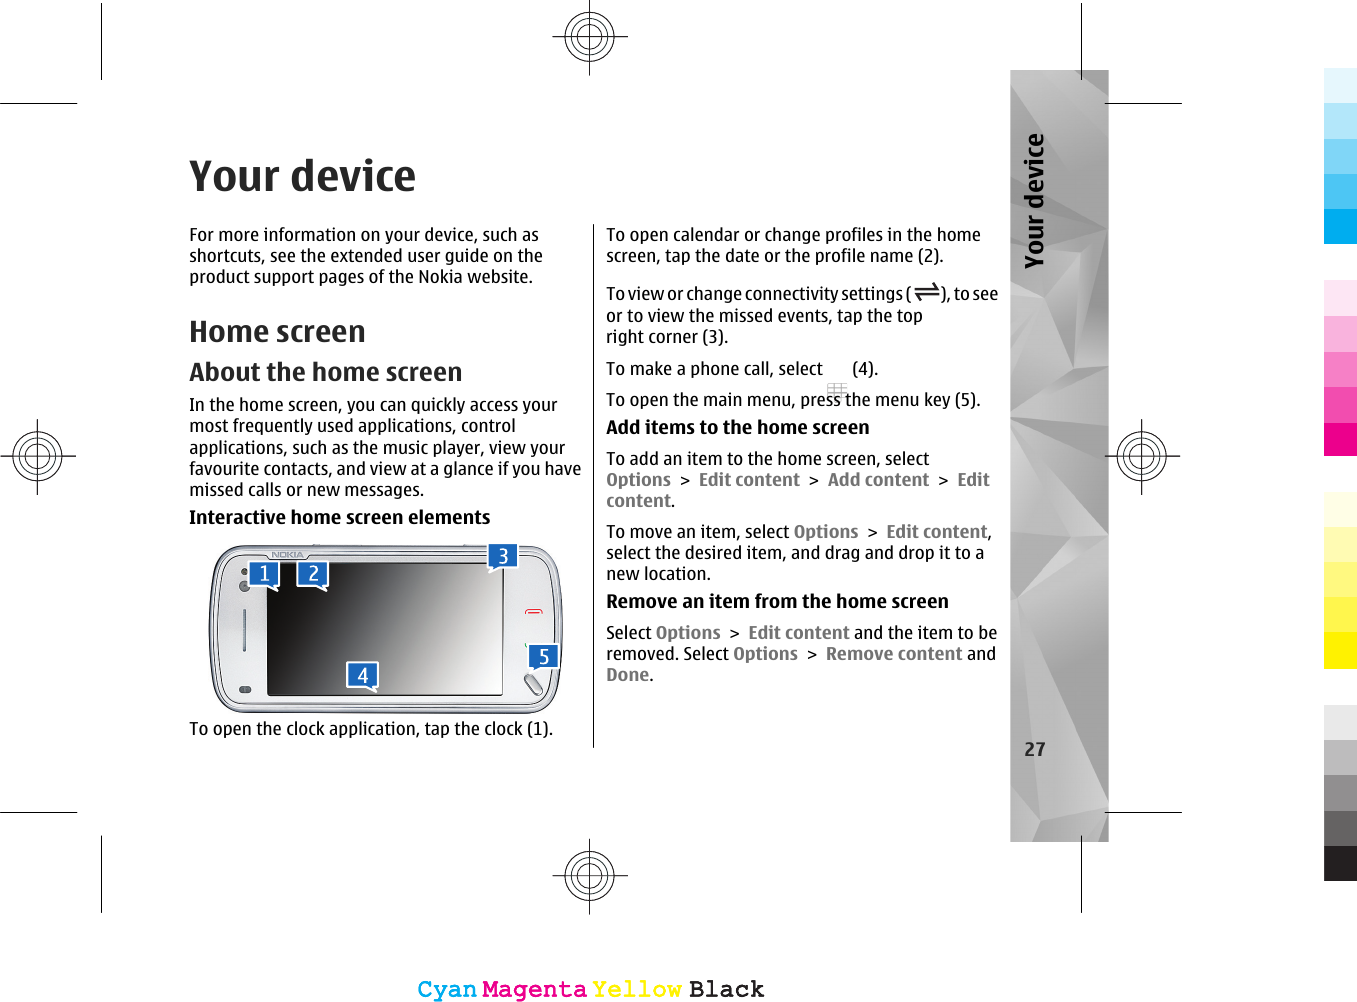 Your deviceFor more information on your device, such asshortcuts, see the extended user guide on theproduct support pages of the Nokia website.Home screenAbout the home screenIn the home screen, you can quickly access yourmost frequently used applications, controlapplications, such as the music player, view yourfavourite contacts, and view at a glance if you havemissed calls or new messages.Interactive home screen elementsTo open the clock application, tap the clock (1).To open calendar or change profiles in the homescreen, tap the date or the profile name (2).To view or change connectivity settings ( ), to seeor to view the missed events, tap the topright corner (3).To make a phone call, select   (4).To open the main menu, press the menu key (5).Add items to the home screenTo add an item to the home screen, selectOptions &gt; Edit content &gt; Add content &gt; Editcontent.To move an item, select Options &gt; Edit content,select the desired item, and drag and drop it to anew location.Remove an item from the home screenSelect Options &gt; Edit content and the item to beremoved. Select Options &gt; Remove content andDone.27Your deviceCyanCyanMagentaMagentaYellowYellowBlackBlackCyanCyanMagentaMagentaYellowYellowBlackBlack